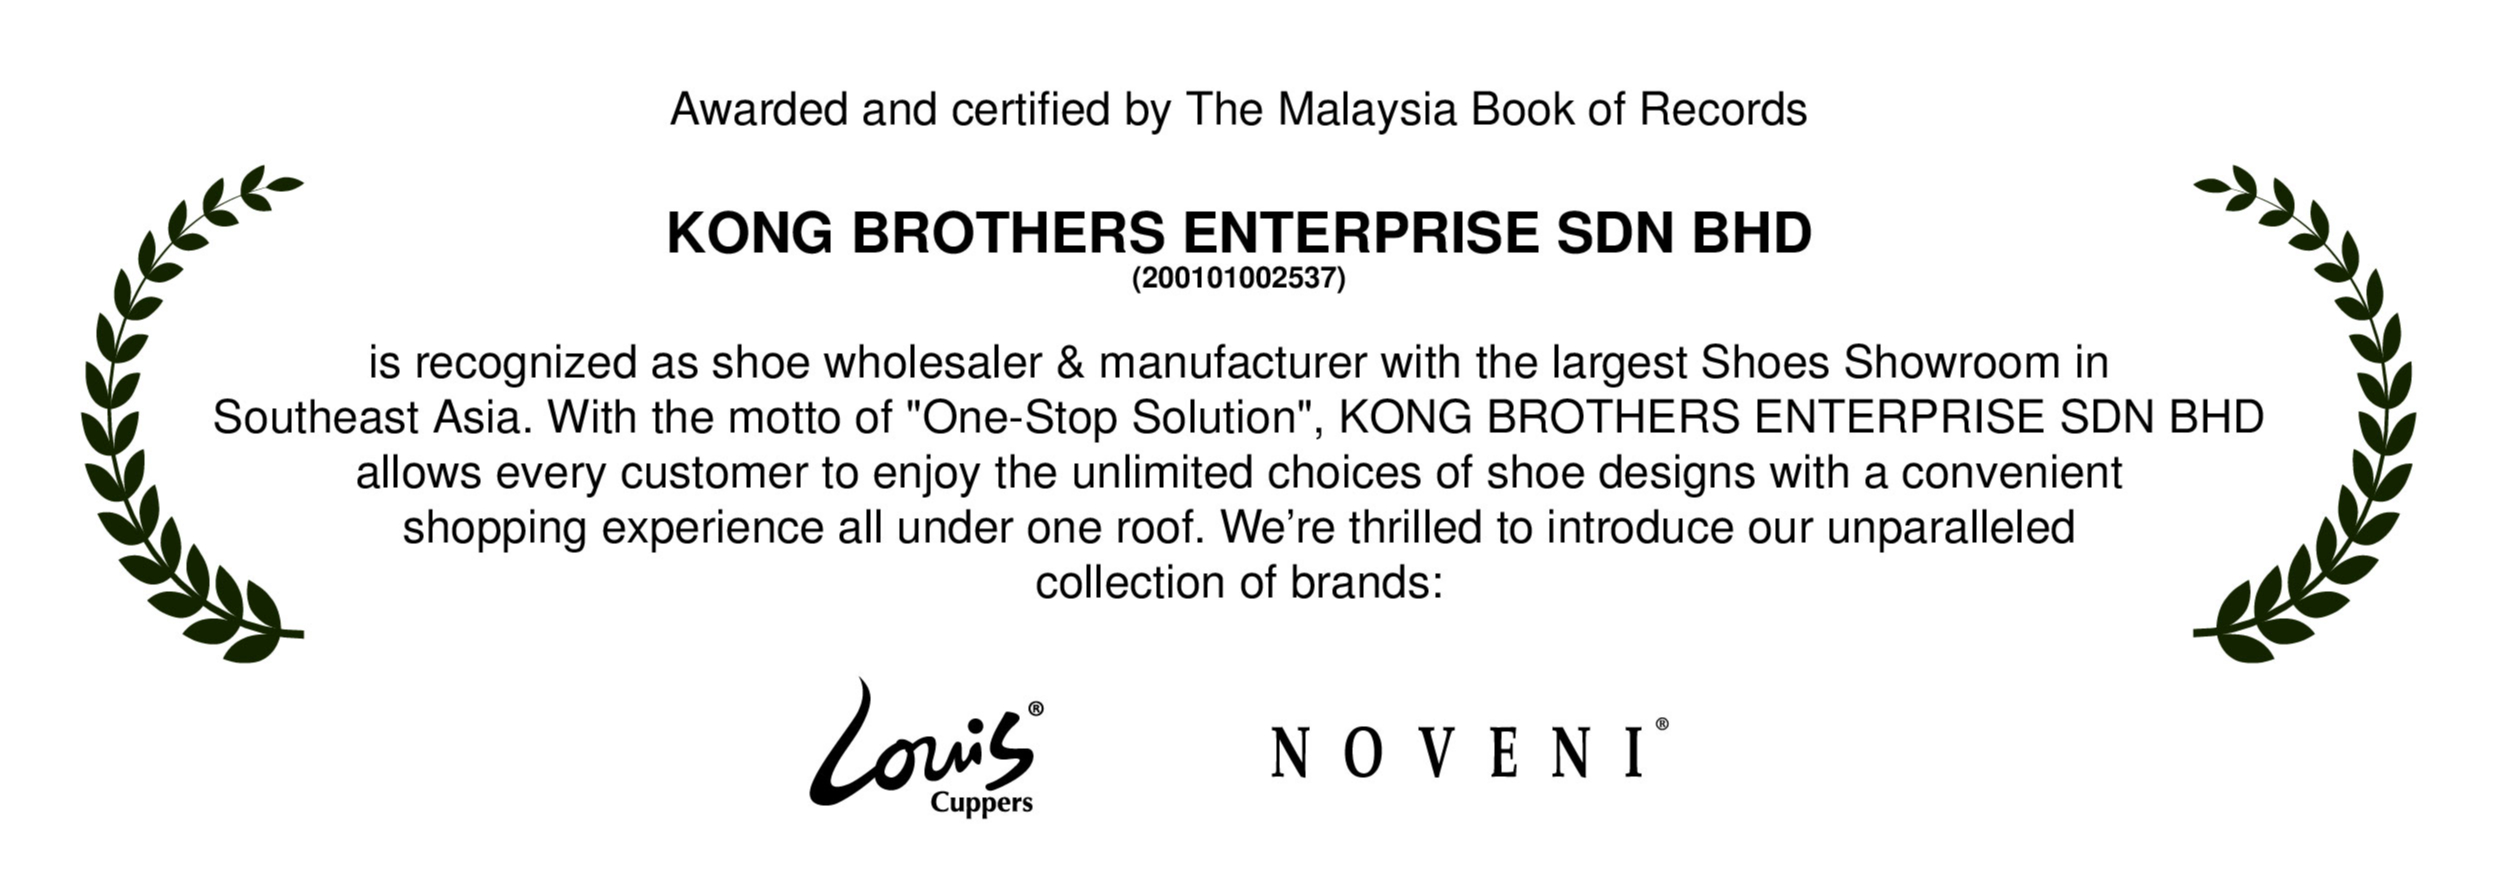 Louis Cuppers - Kong Brothers Enterprise